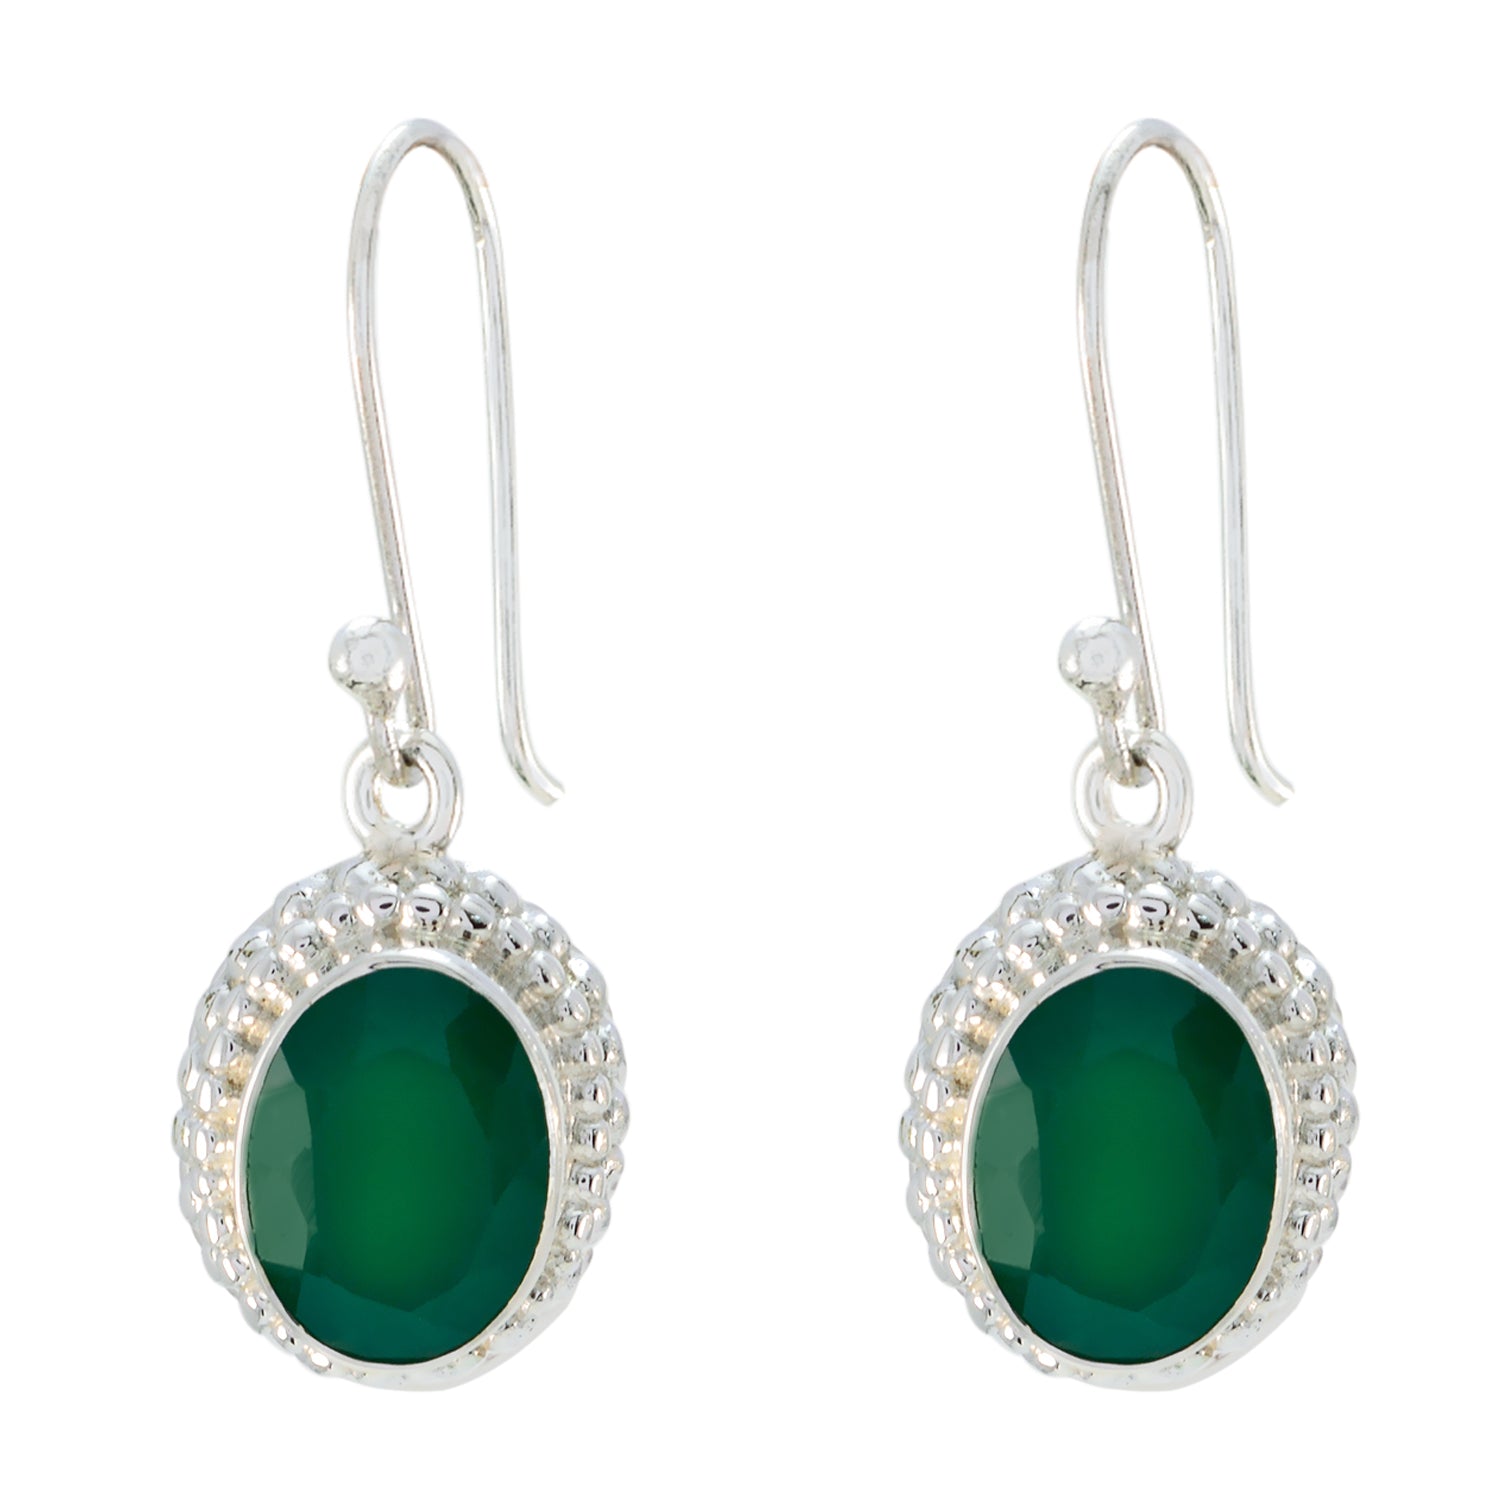 Riyo Real Gemstones round Faceted Green Onyx Silver Earring gift for cyber Monday